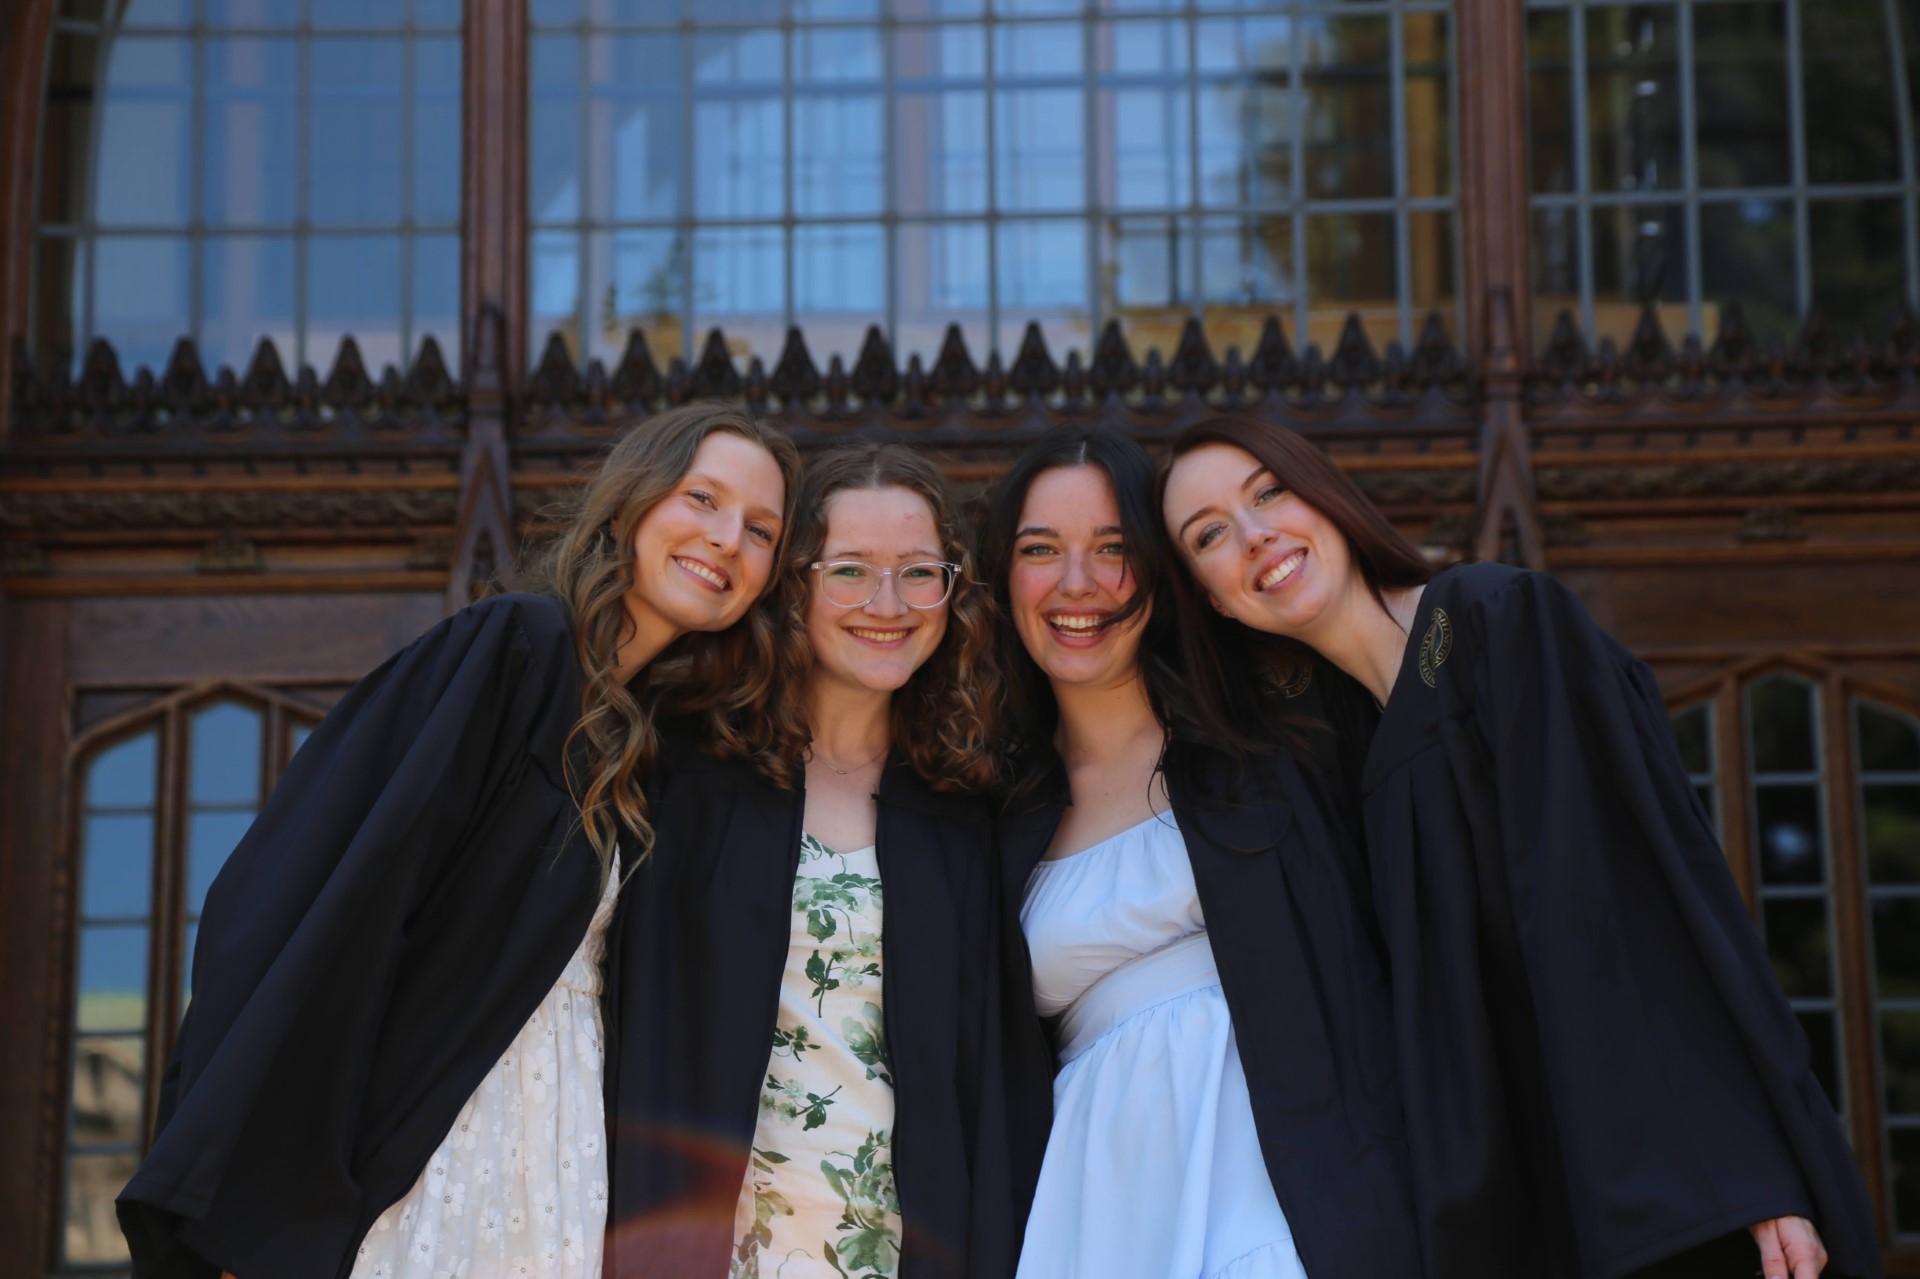 Four young women pose in black graduation robes in front of a library.